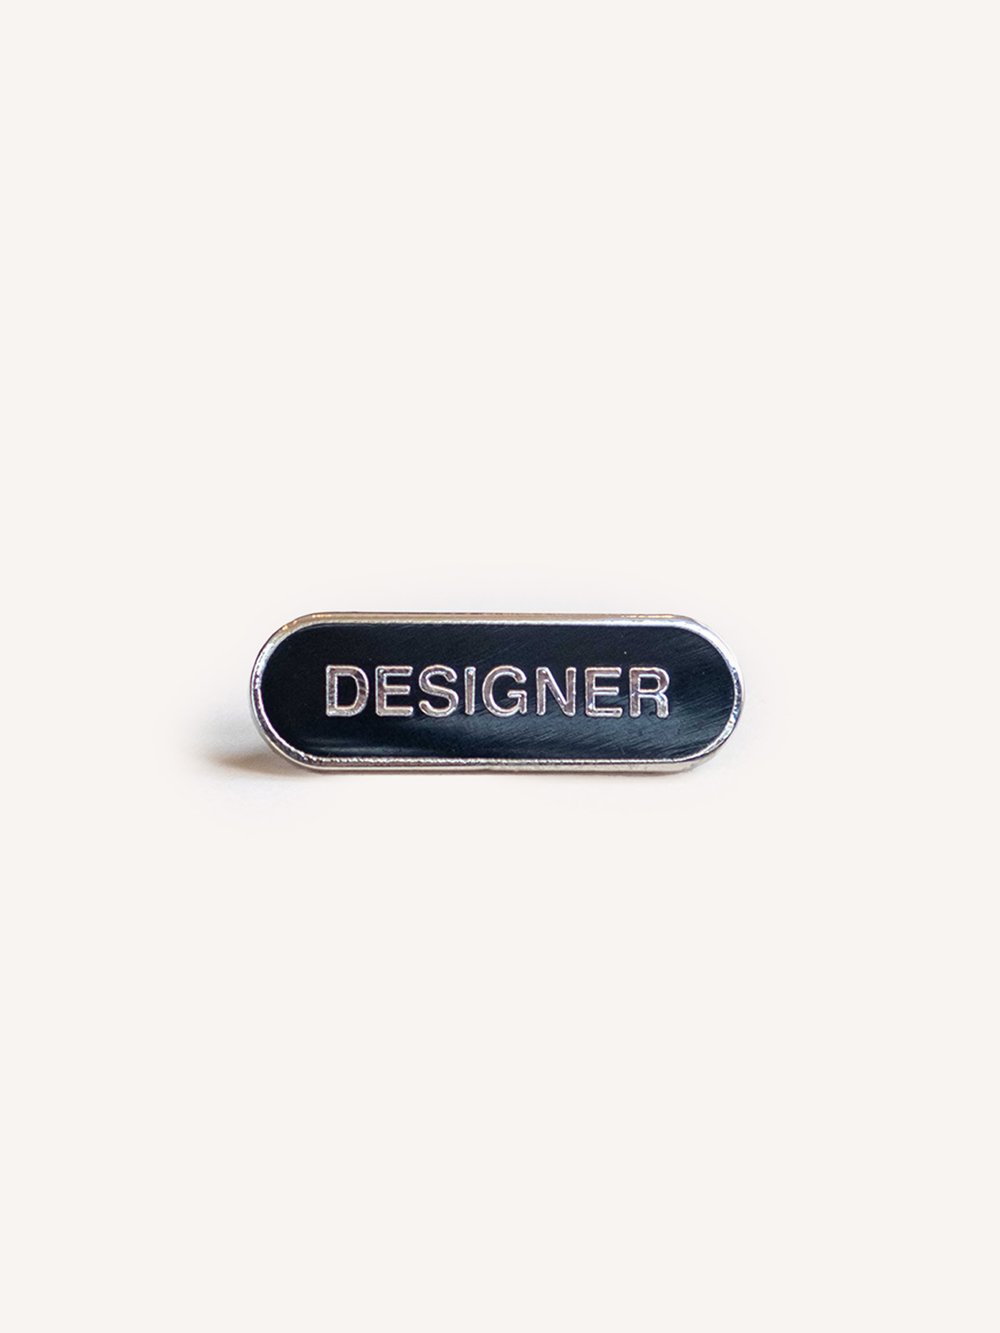 Pin on Designing Clothes